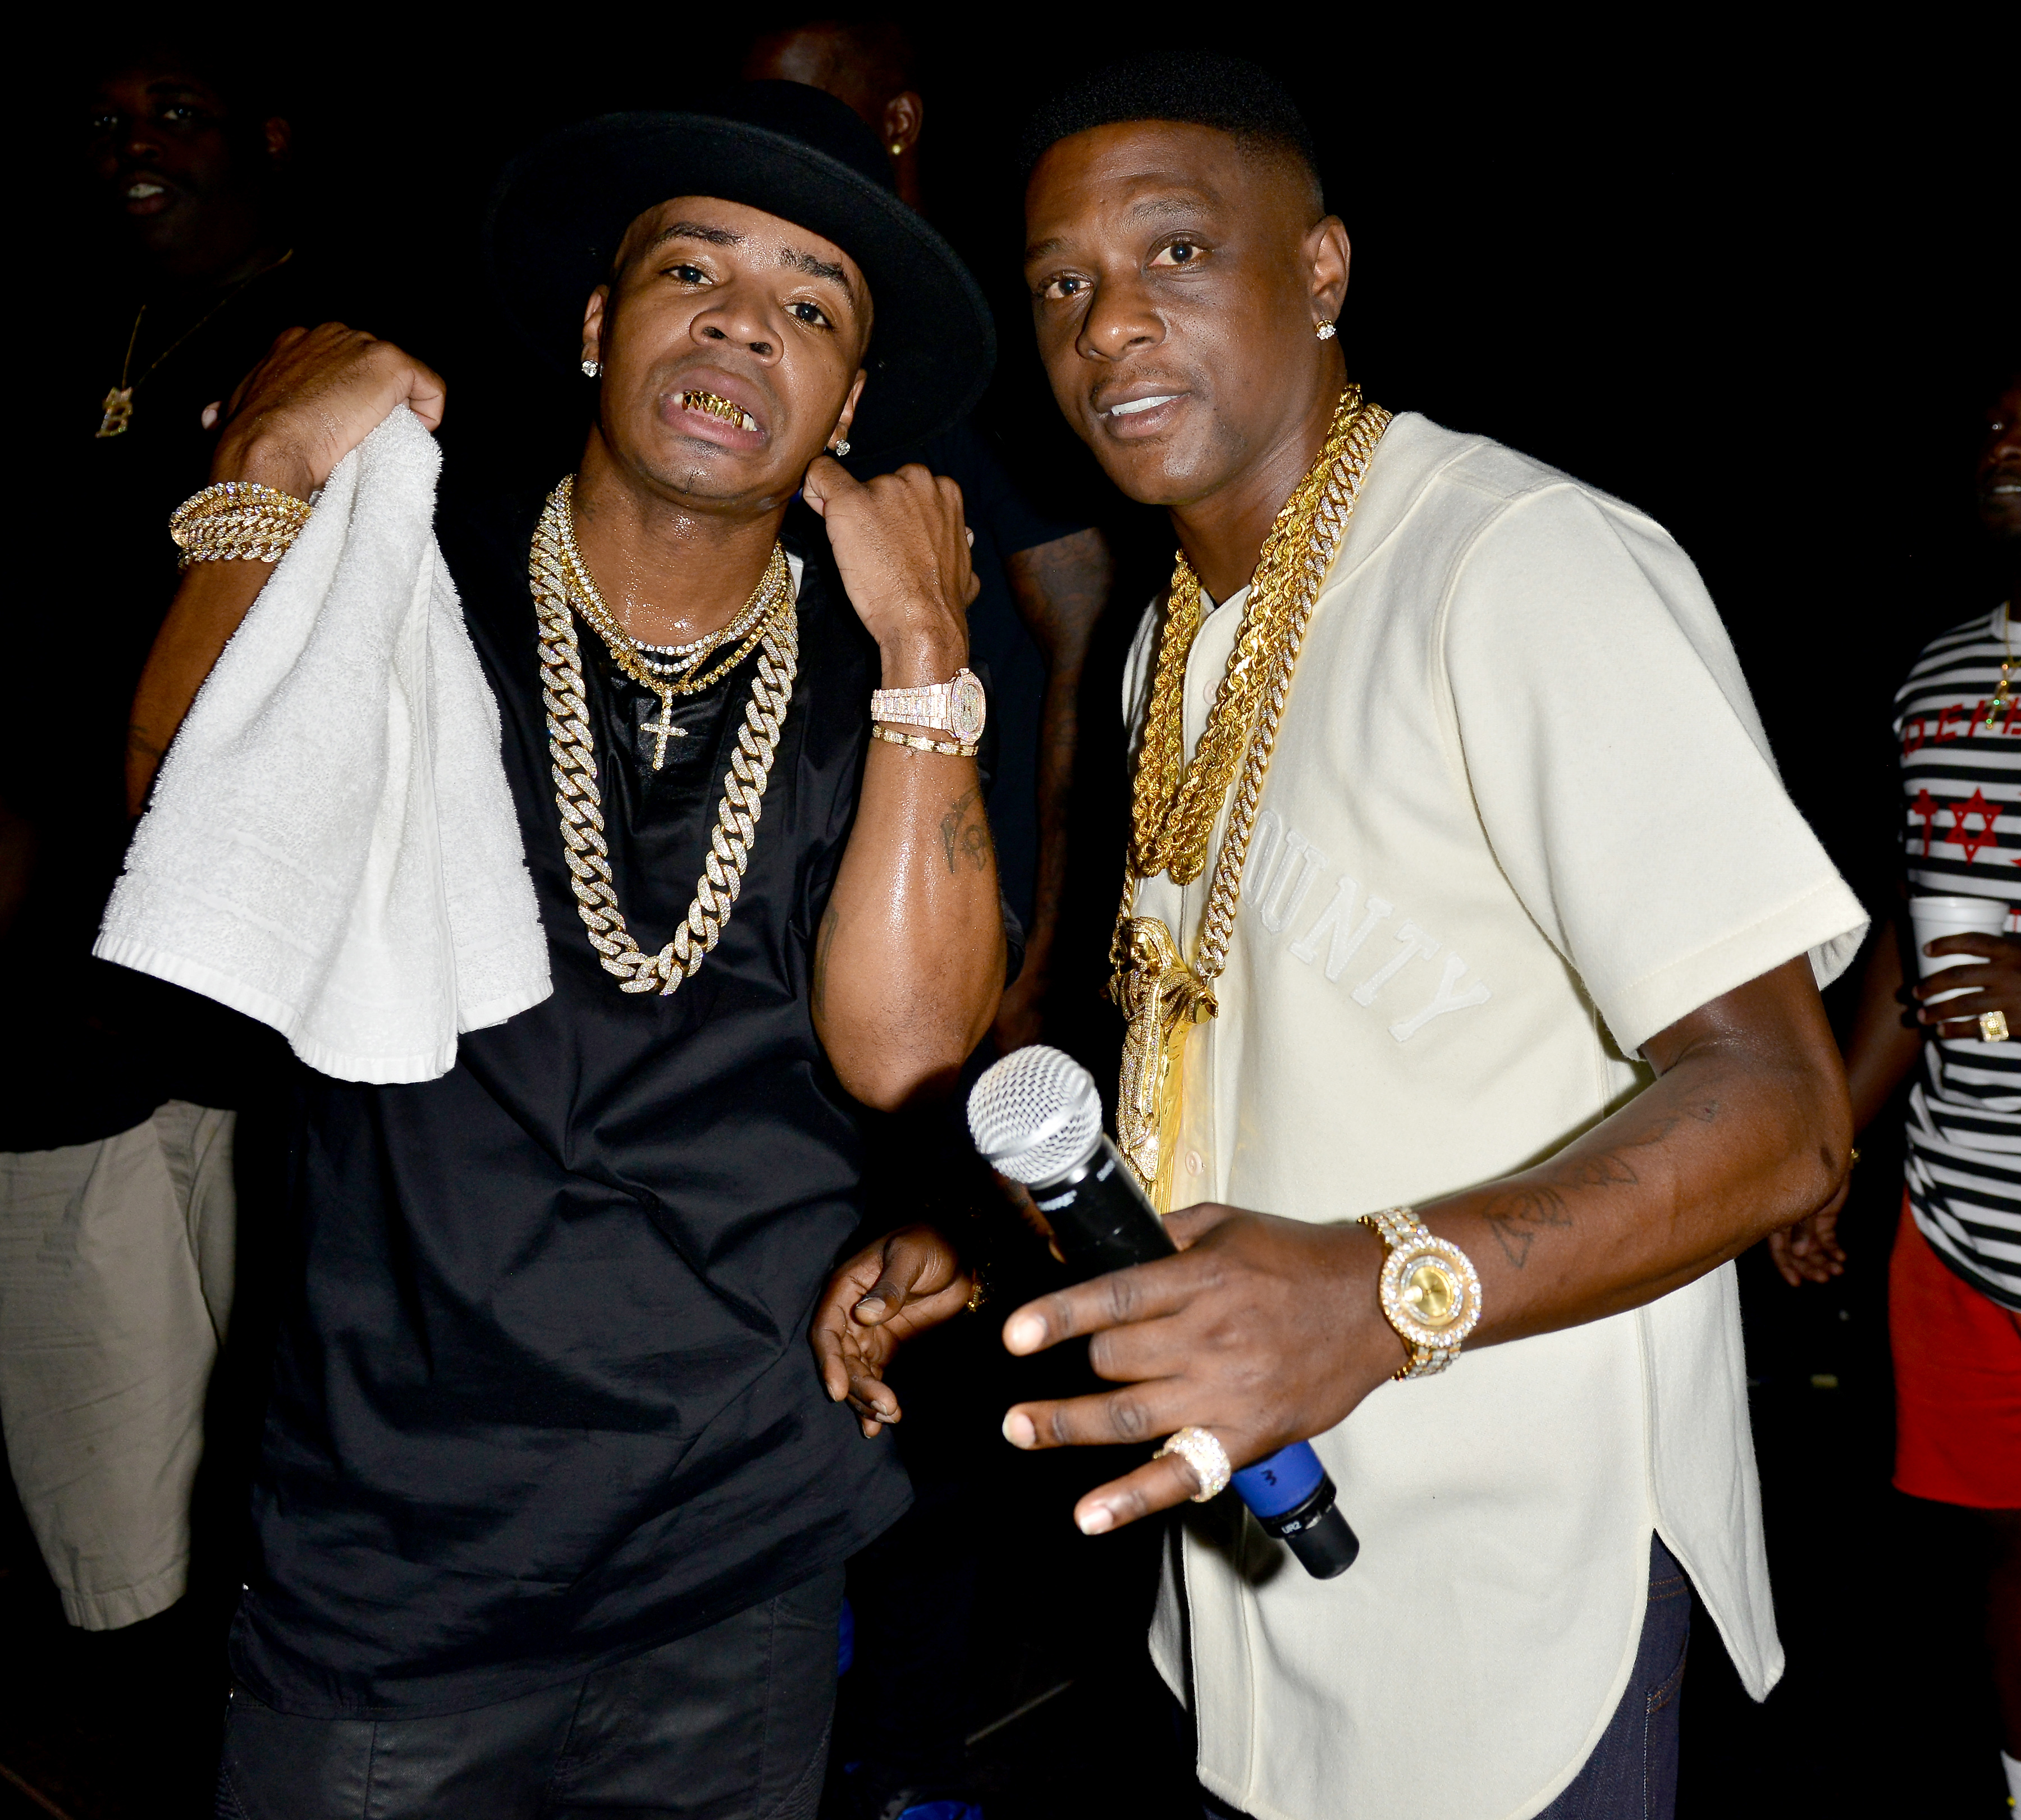 Lil&apos; Boosie and Plies Kings backstage during the Kings of the Streets Tour at the James L. Knight Center